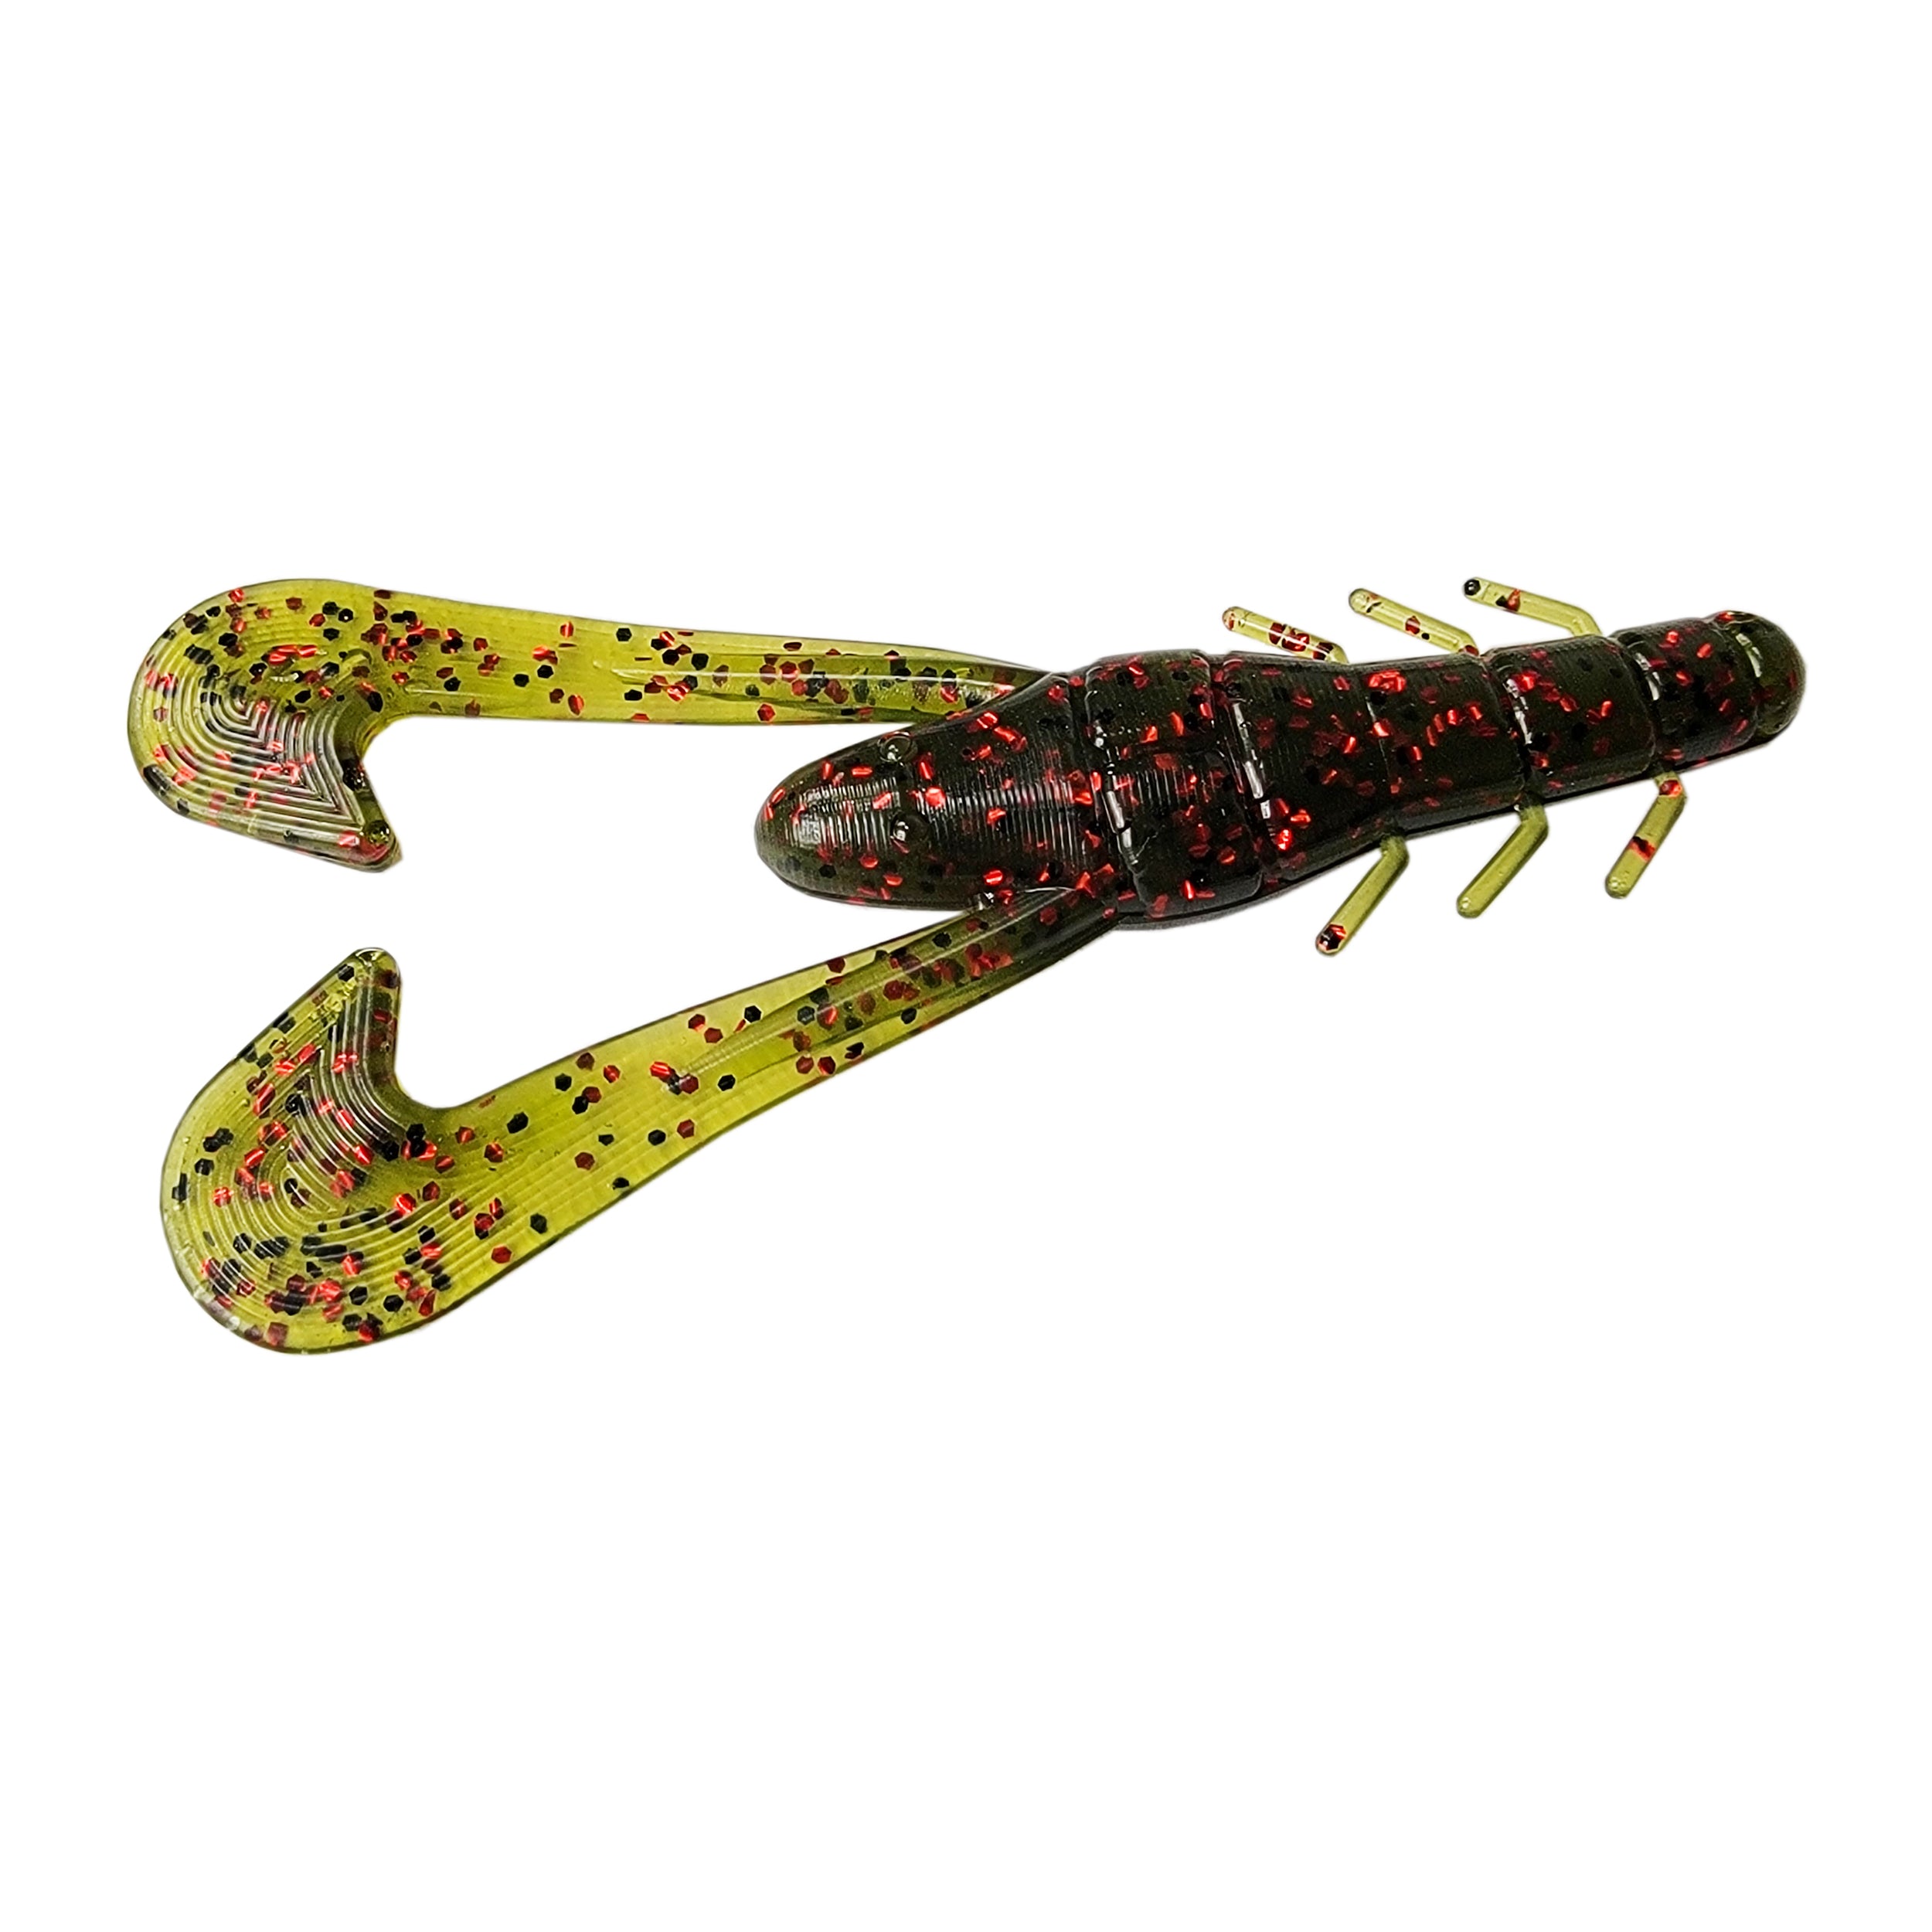 Zoom Mag Ultravibe Speed Worm - Watermelon Seed